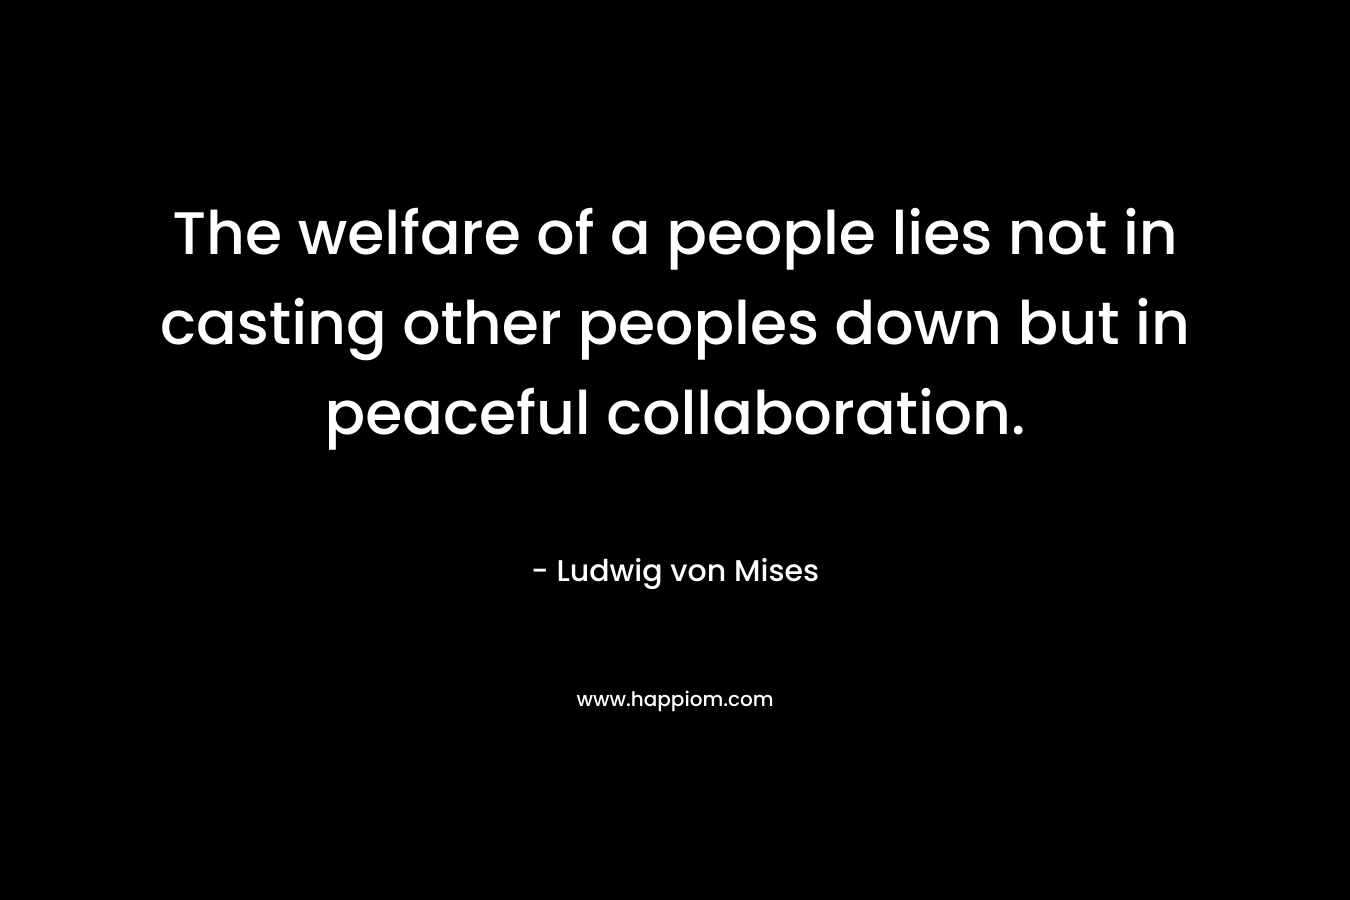 The welfare of a people lies not in casting other peoples down but in peaceful collaboration. – Ludwig von Mises